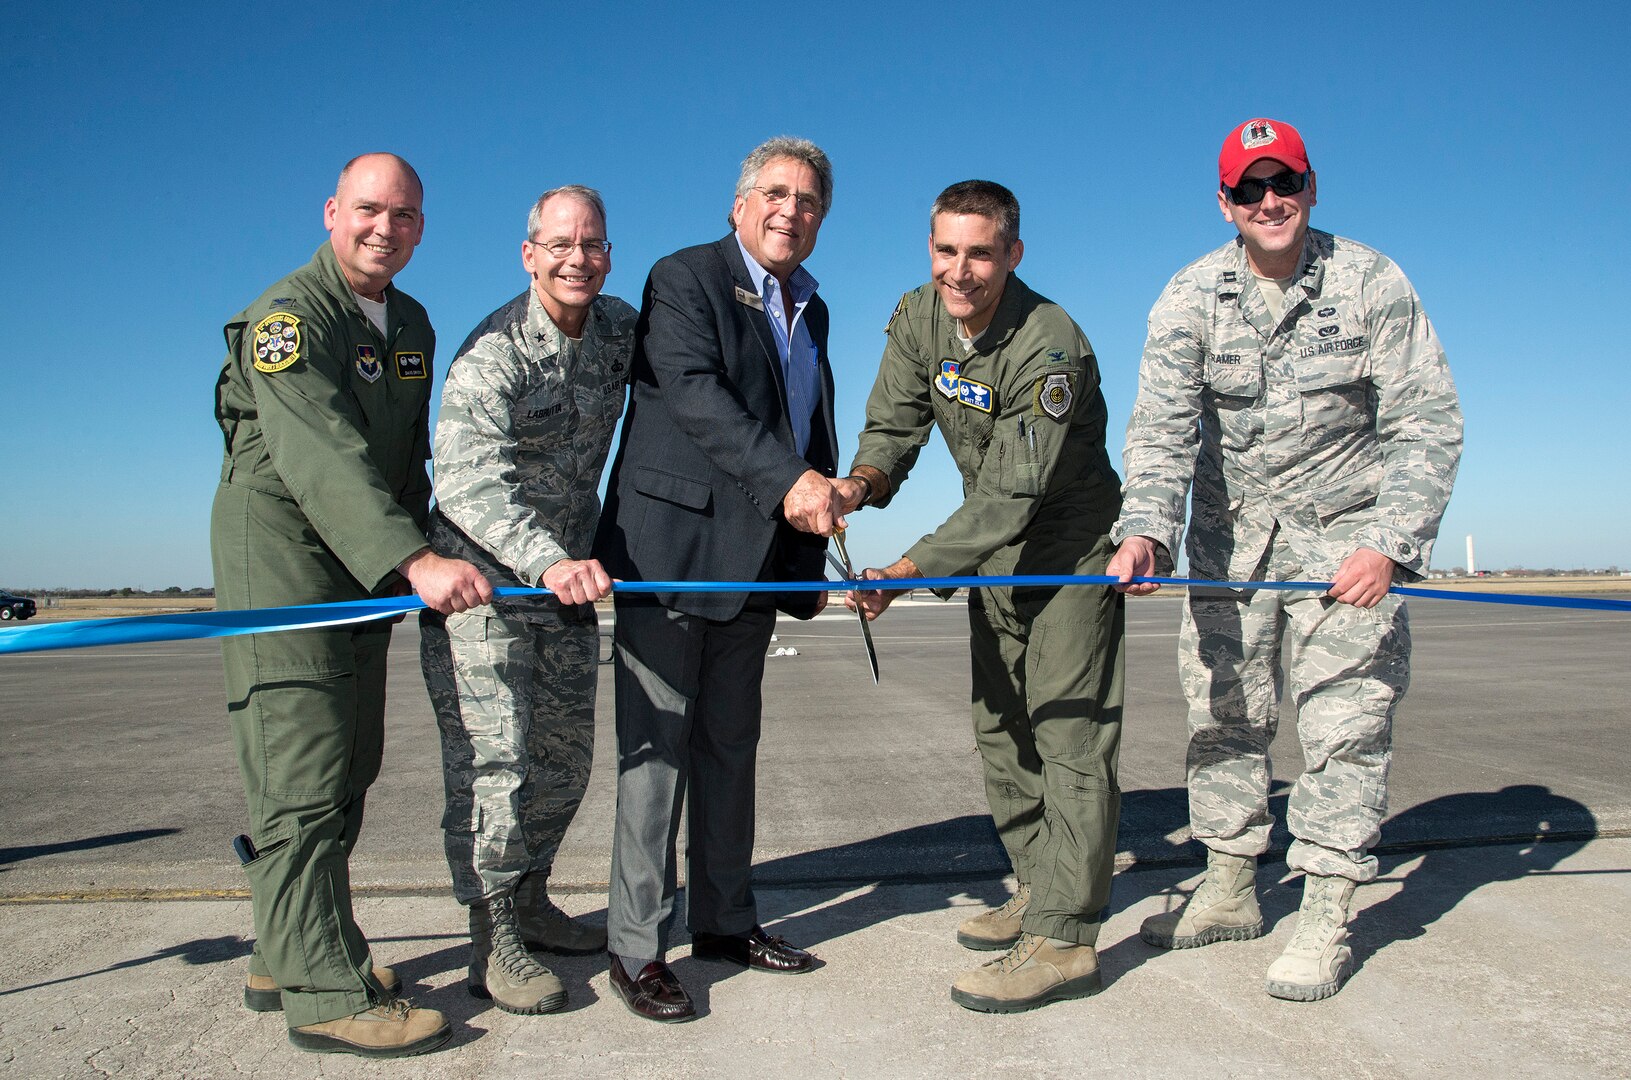 Col. David Drichta, 12th Operations Group commander, Brig. Gen. Bob LaBrutta, 502nd Air Base Wing and Joint Base San Antonio commander, City of Seguin Mayor Don Keil, Col. Matt Isler, 12th Flying Training Wing commander; and Capt. Erich Kramer, 820th Rapid Engineers Deployable Heavy Operational Repair Squadron design engineer cut the ribbon signifying the reopening of the Joint Base San Antonio-Randolph Seguin Auxiliary Airfield Jan. 20.  Upon completion of a three-year construction project, the airfield is now ready for flying by members of the 560th Flying Training Squadron.  The airfield is crucial for “touch and go” training that qualifies fighter and bomber pilots as instructor pilots in the T-38C Talon.  The reconstructed runway increases flight safety by distributing training around the San Antonio area, which means fewer aircraft and less congestion around Joint Base San Antonio-Randolph. (U.S. Air Force photo by Johnny Saldivar)